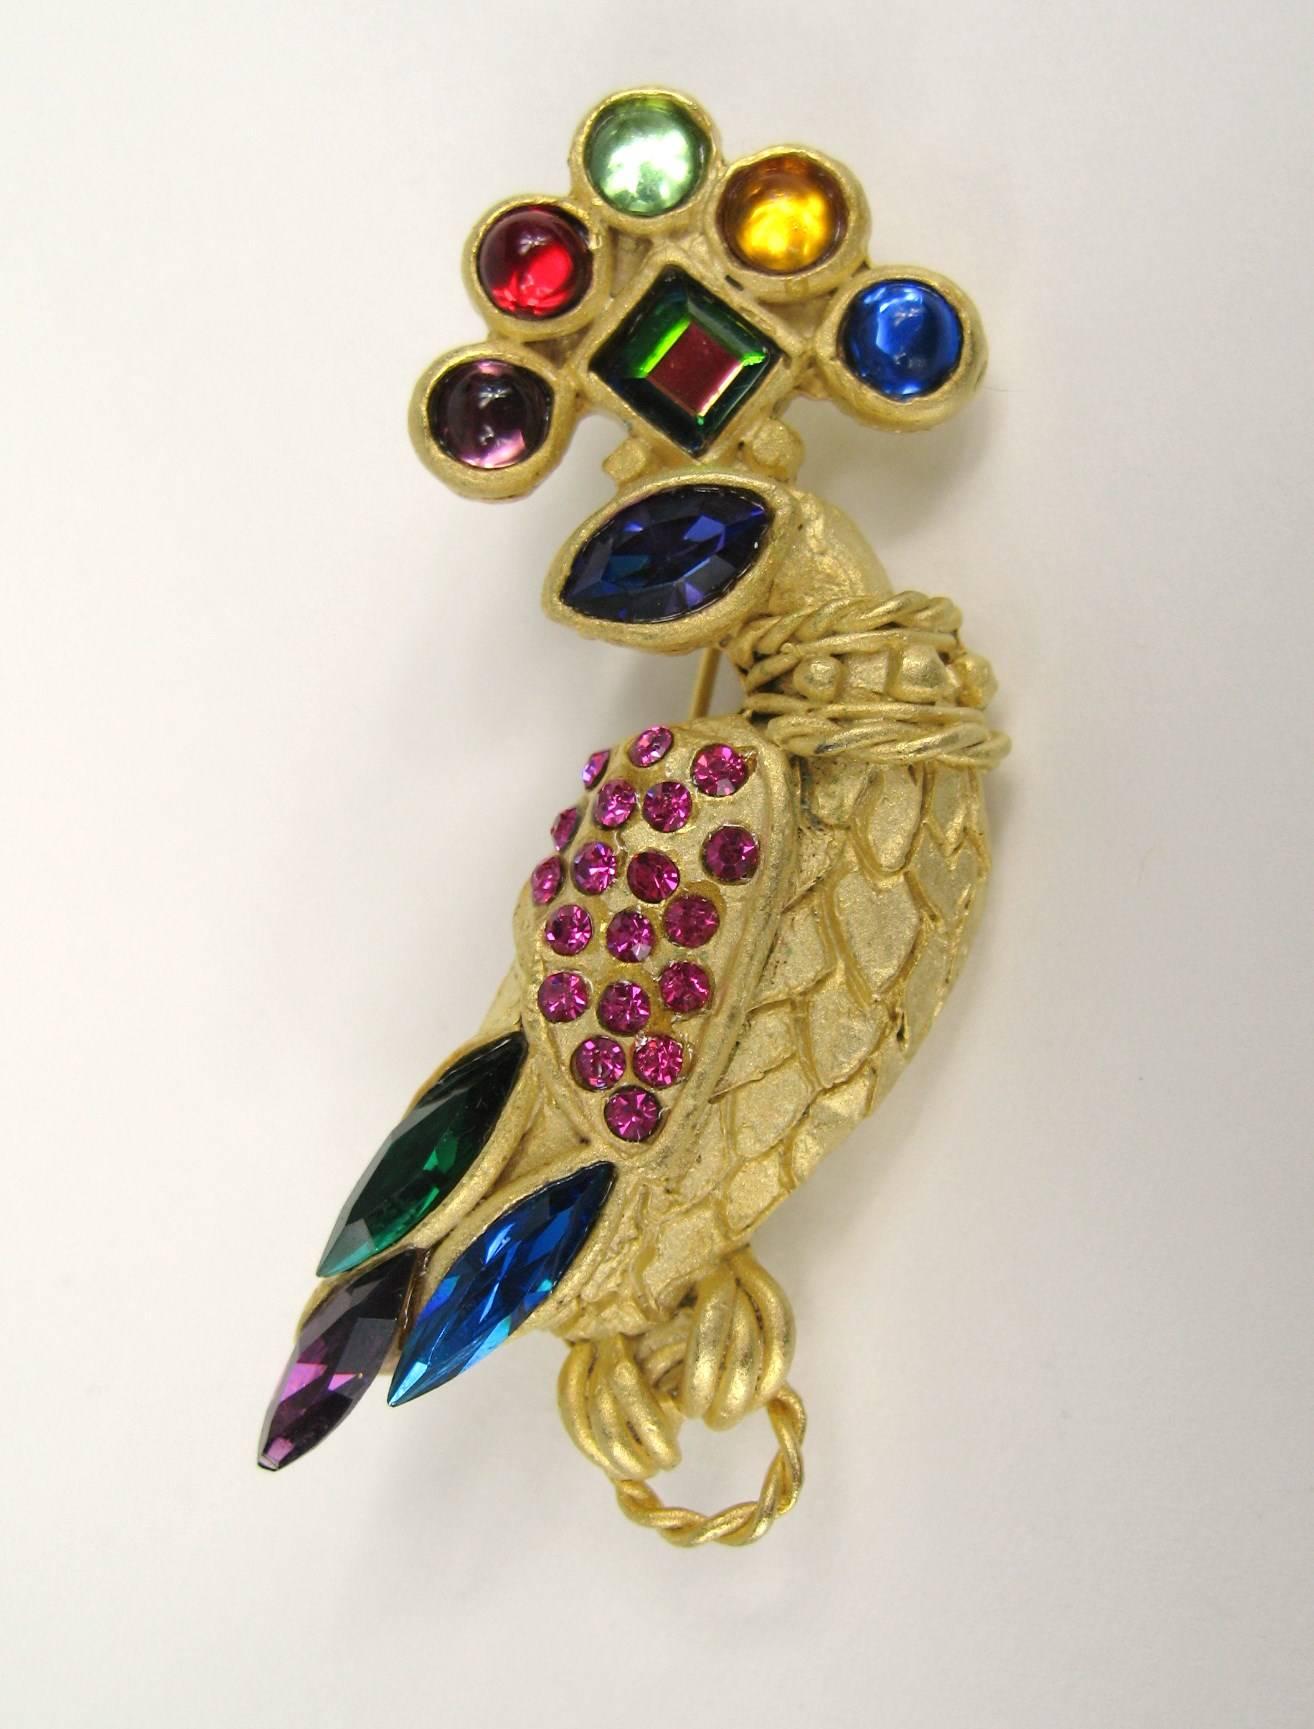 Another piece out of a massive collection of costume jewelry Peacock Brooch that has Bezel Cabochons as well as faceted cut crystals on the headdress and body of this one.  Measuring 2.65in.   x 1.04in.  This is out of a massive collection of Hopi,